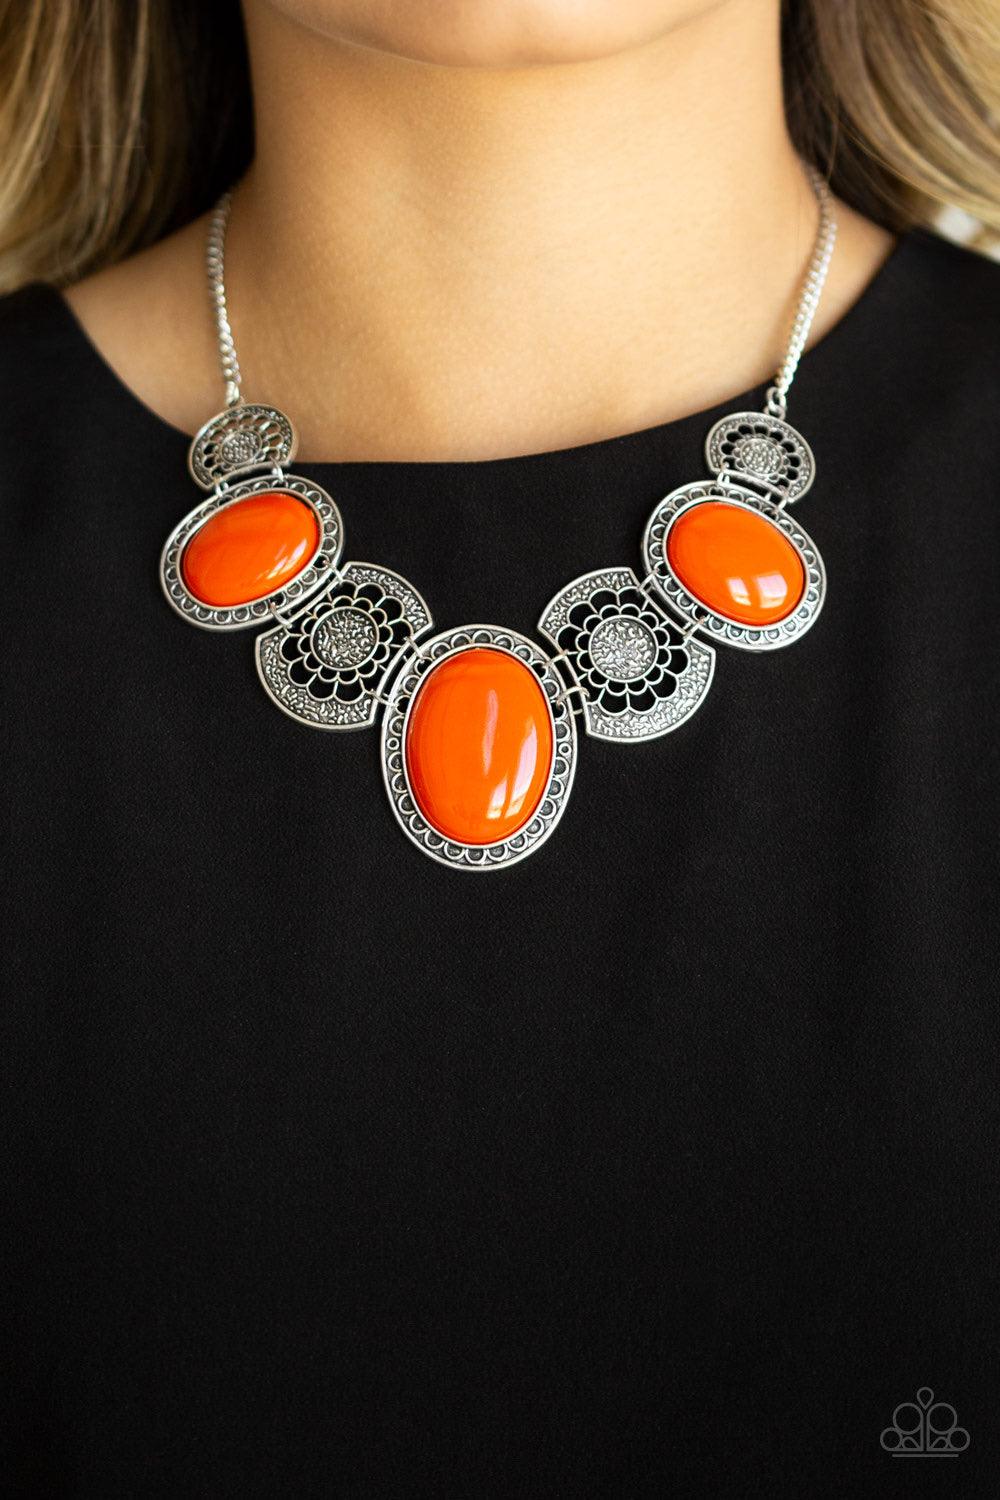 Paparazzi Accessories The Medallion-aire - Orange Flat orange beads connect with shimmery silver floral frames below the collar, creating a colorful medallion-like statement piece with a vintage inflection. Features an adjustable clasp closure. Jewelry